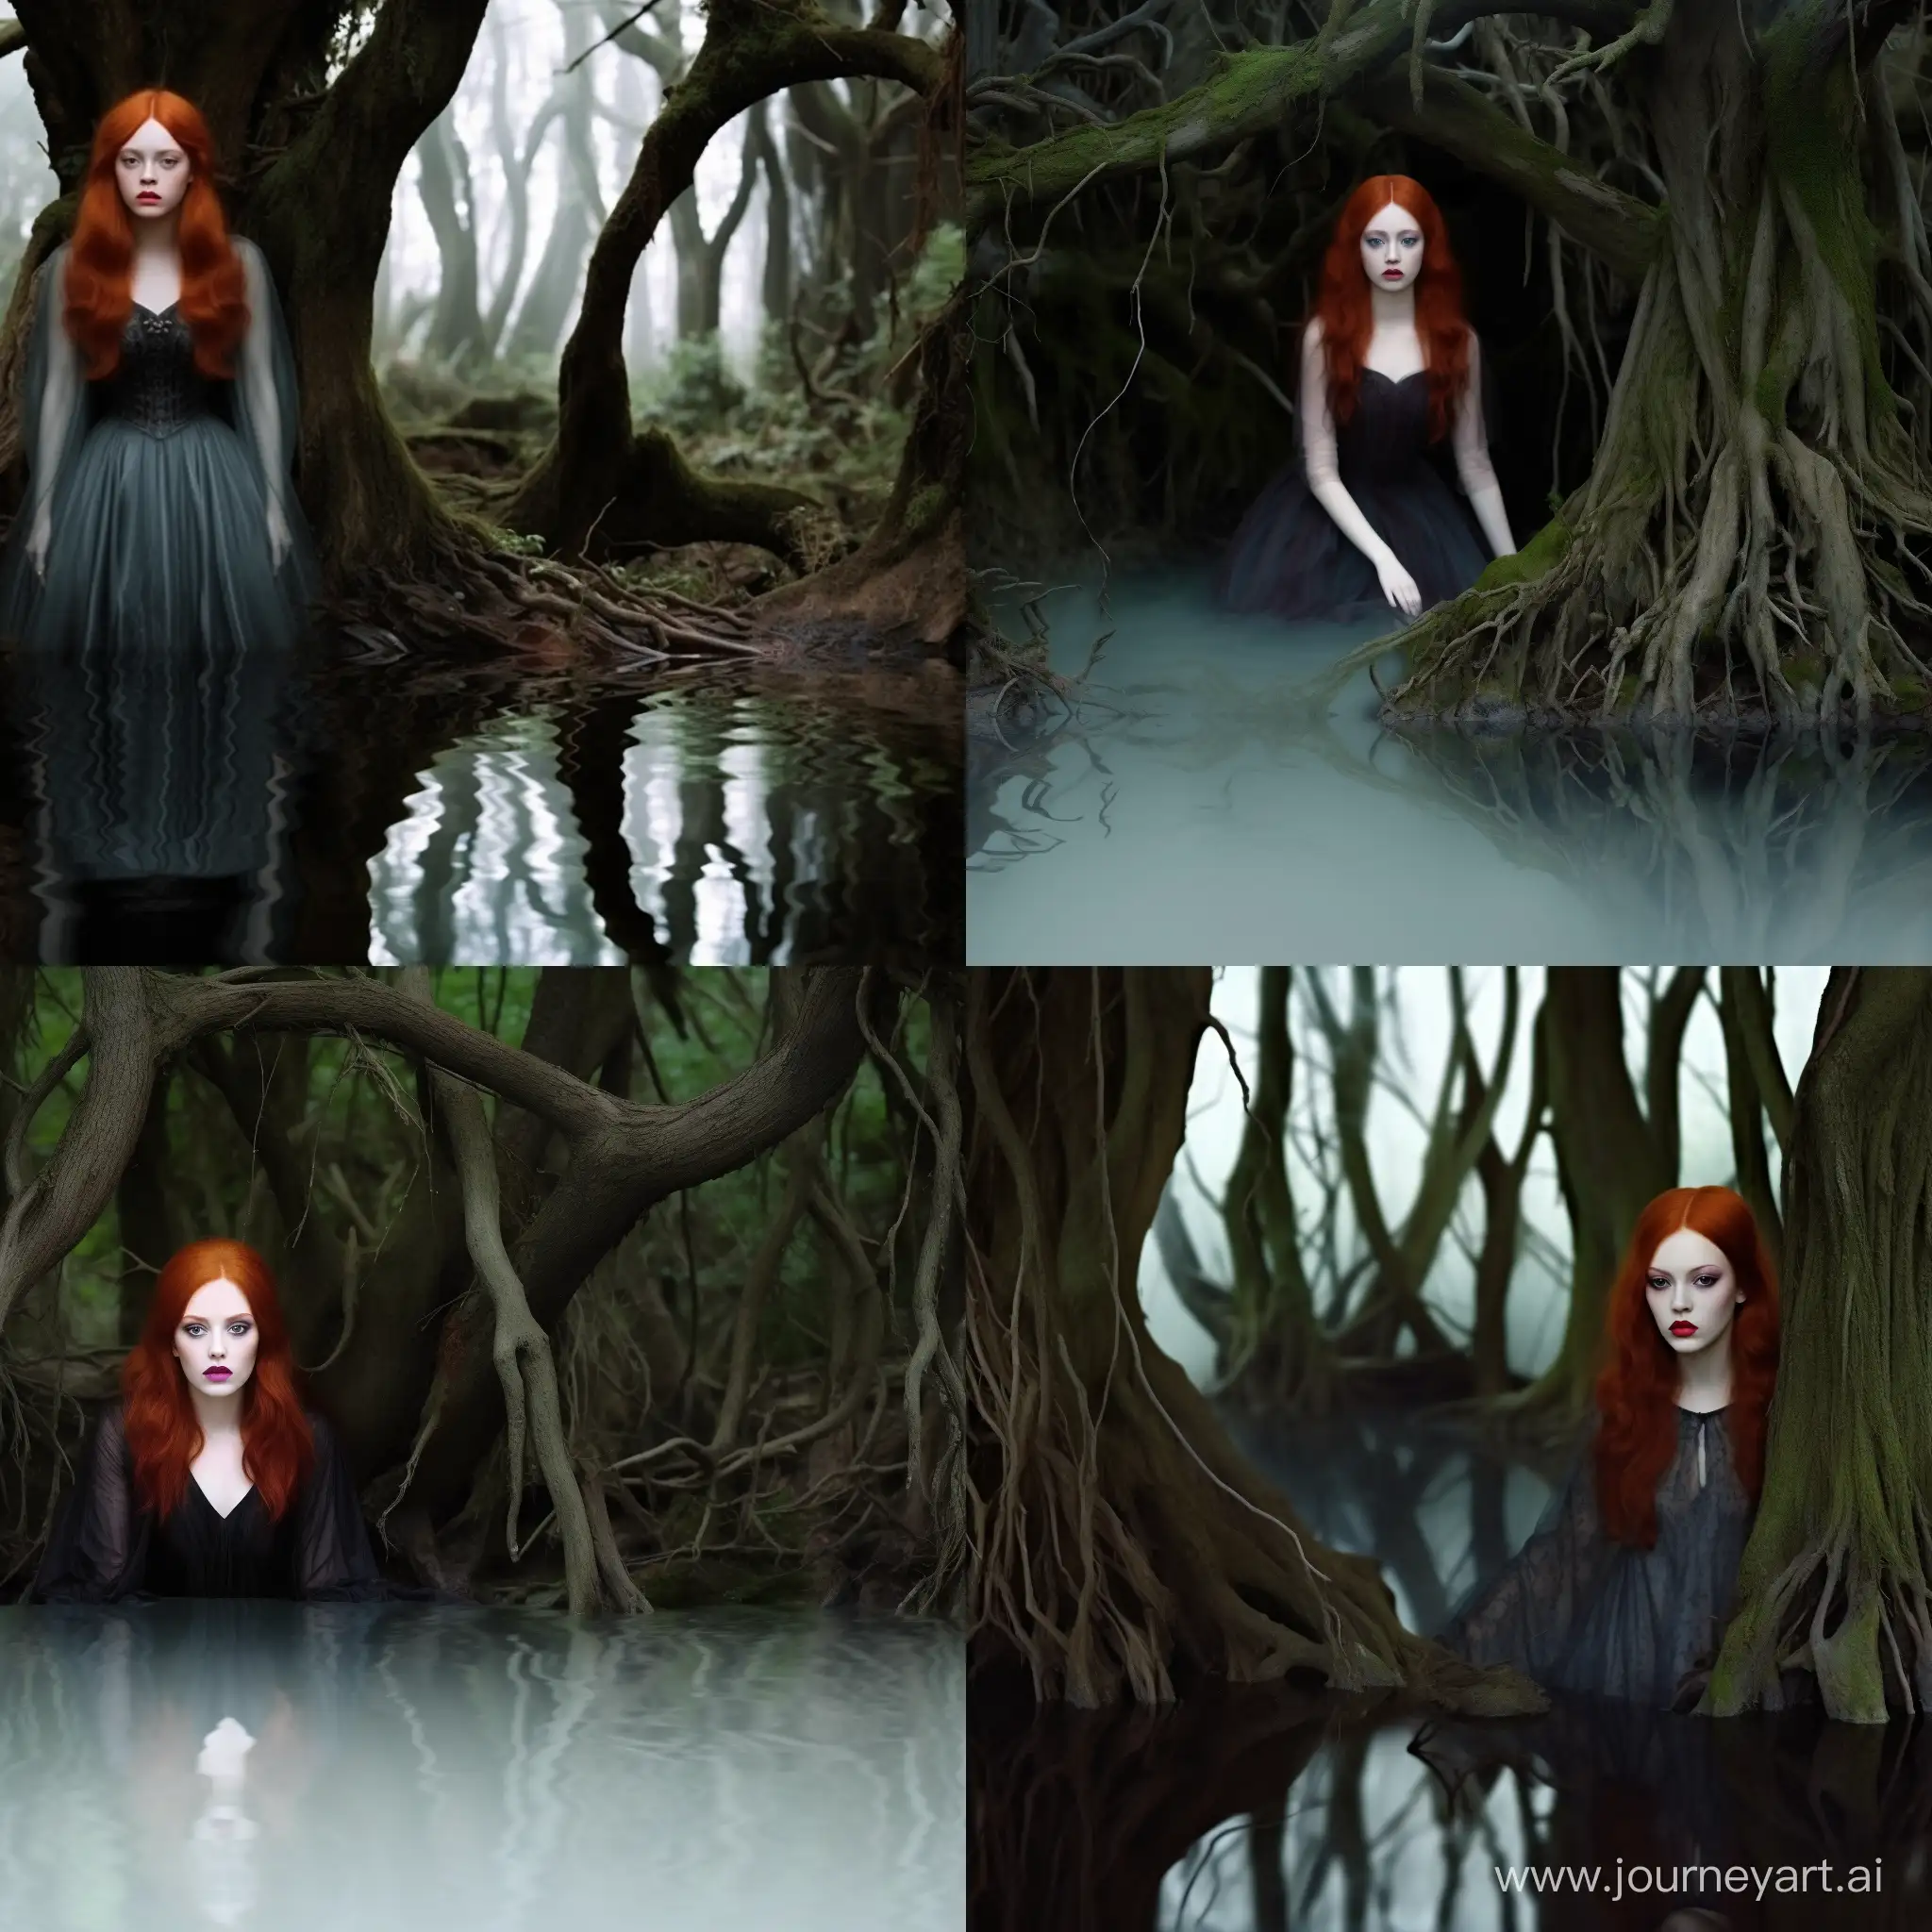 close-up of a red-haired woman who abandons herself to sleep in the transparent water of a spring water lake surrounded by greenery, while dark creatures spy on her from afar among the trees, photo